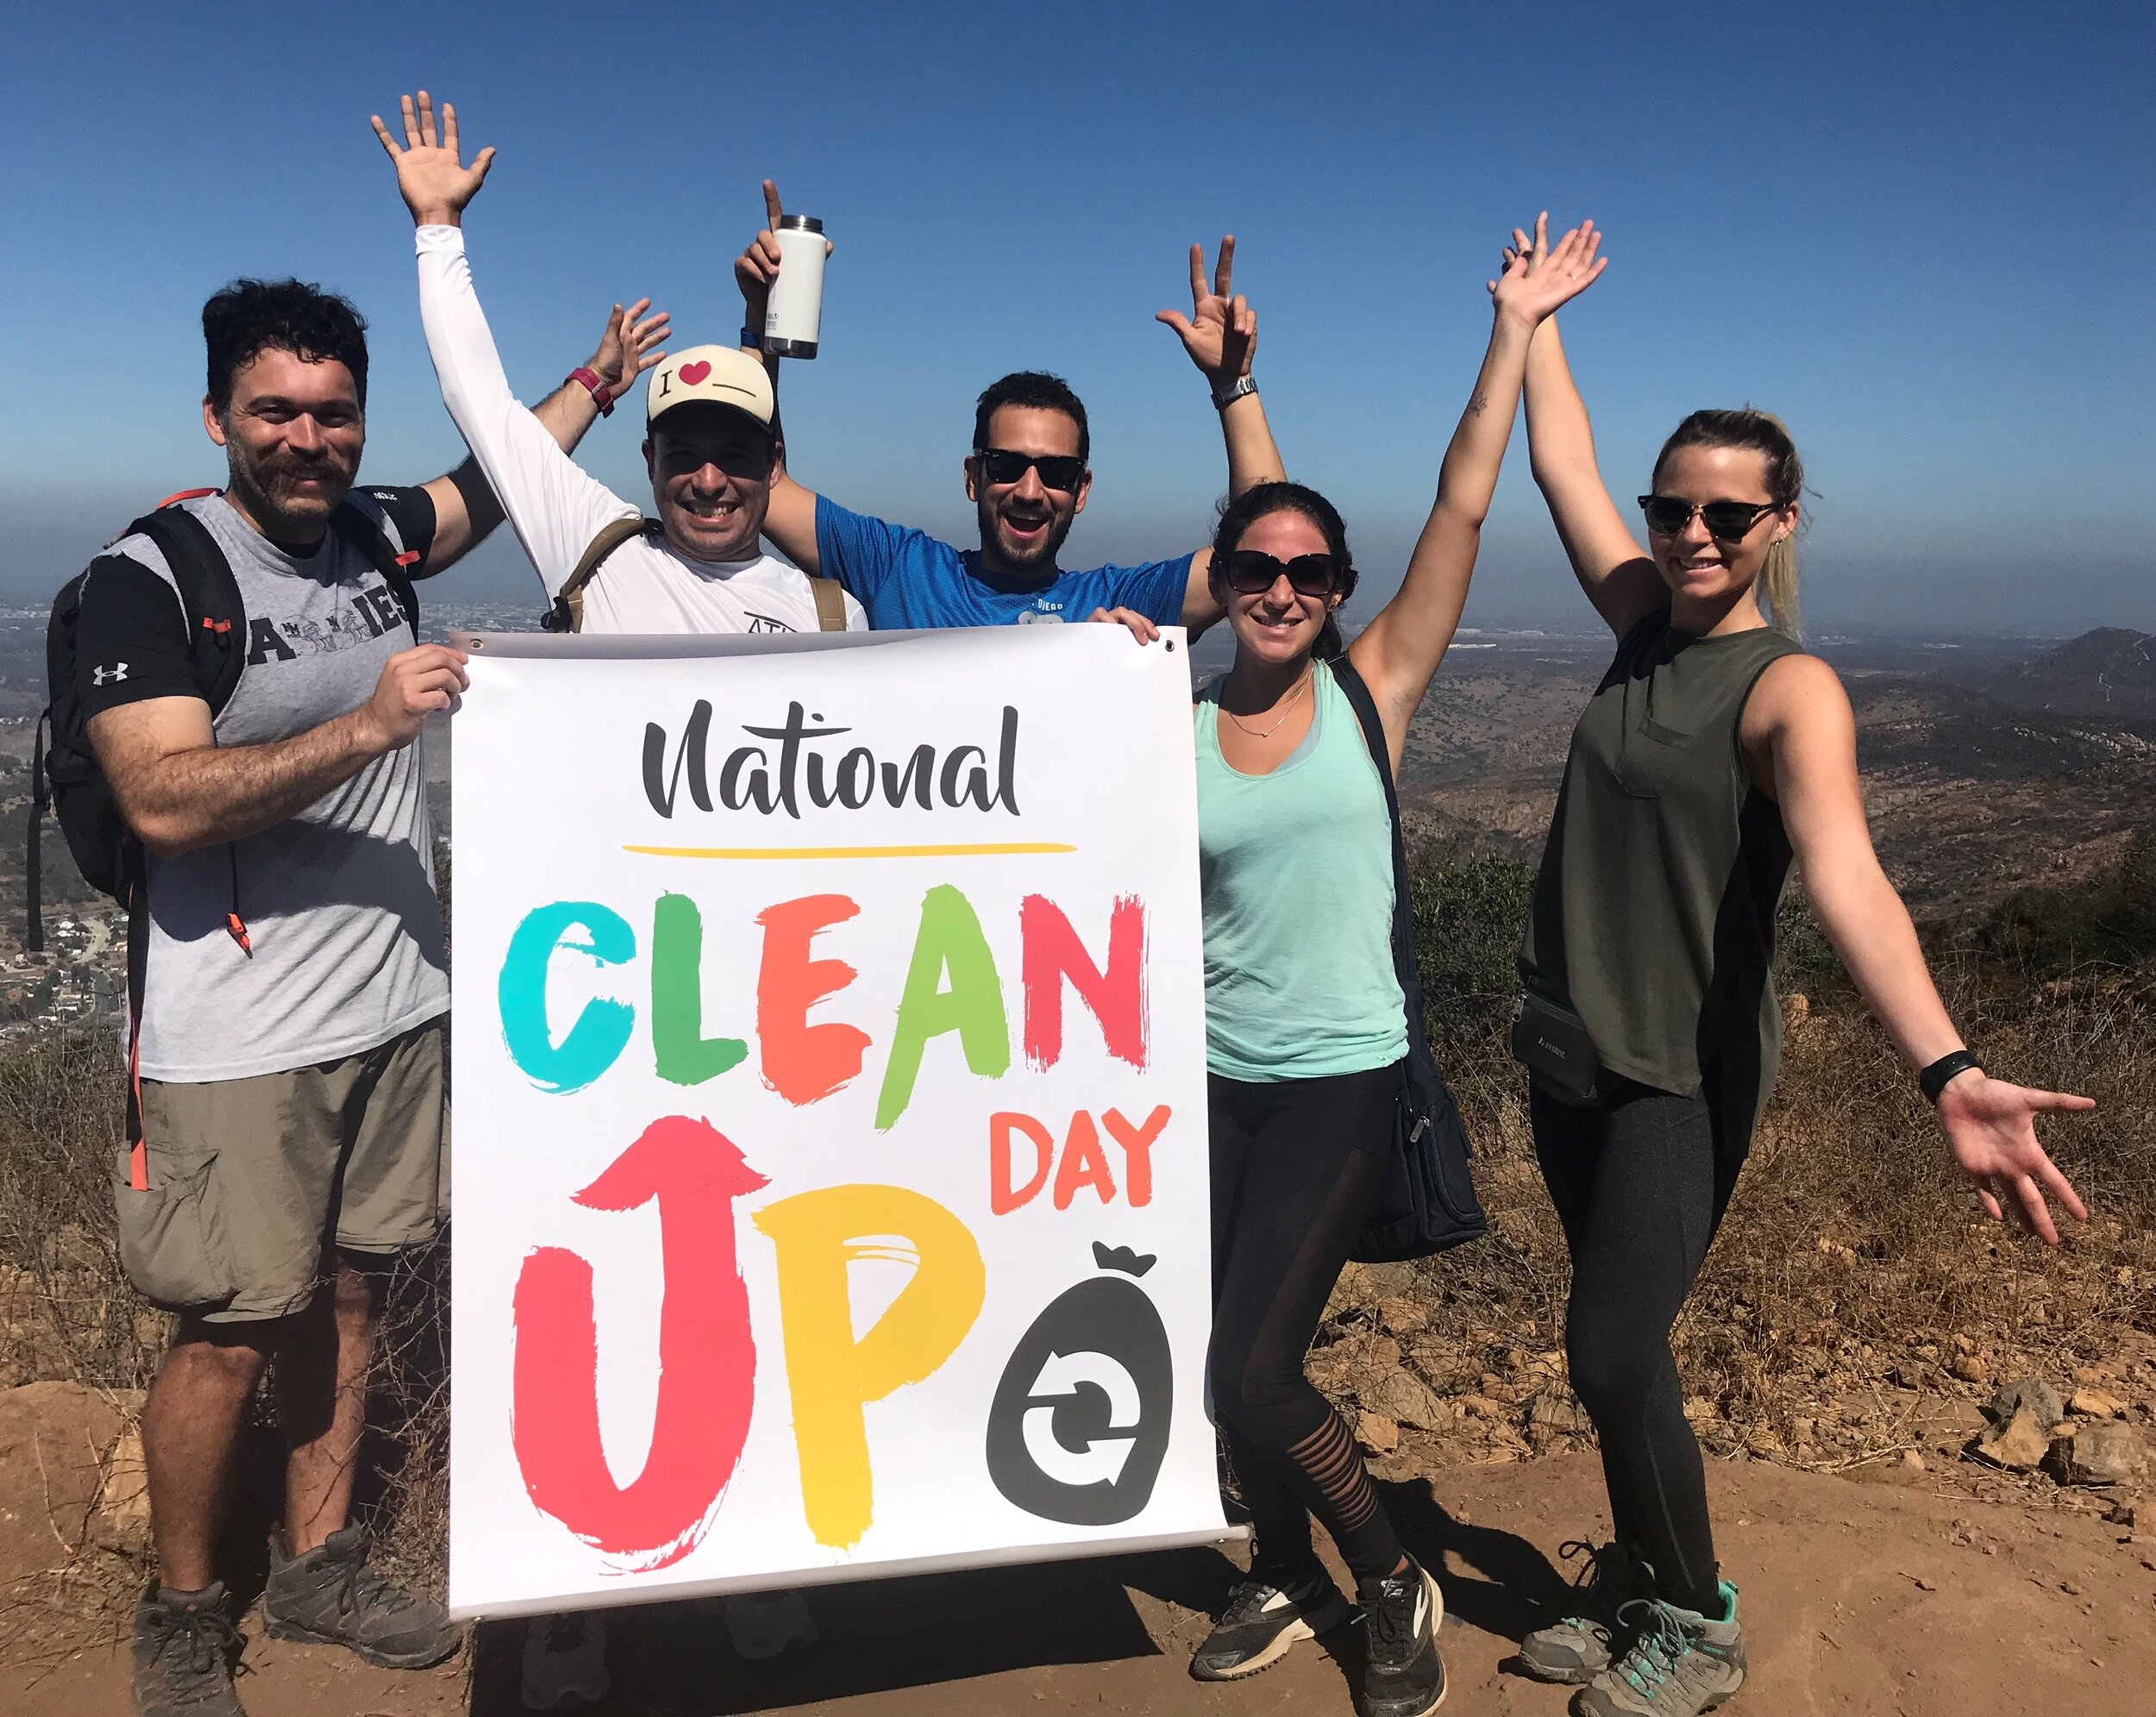 Cowles Mountain National CleanUp Day Group of 5 August 2019.jpg